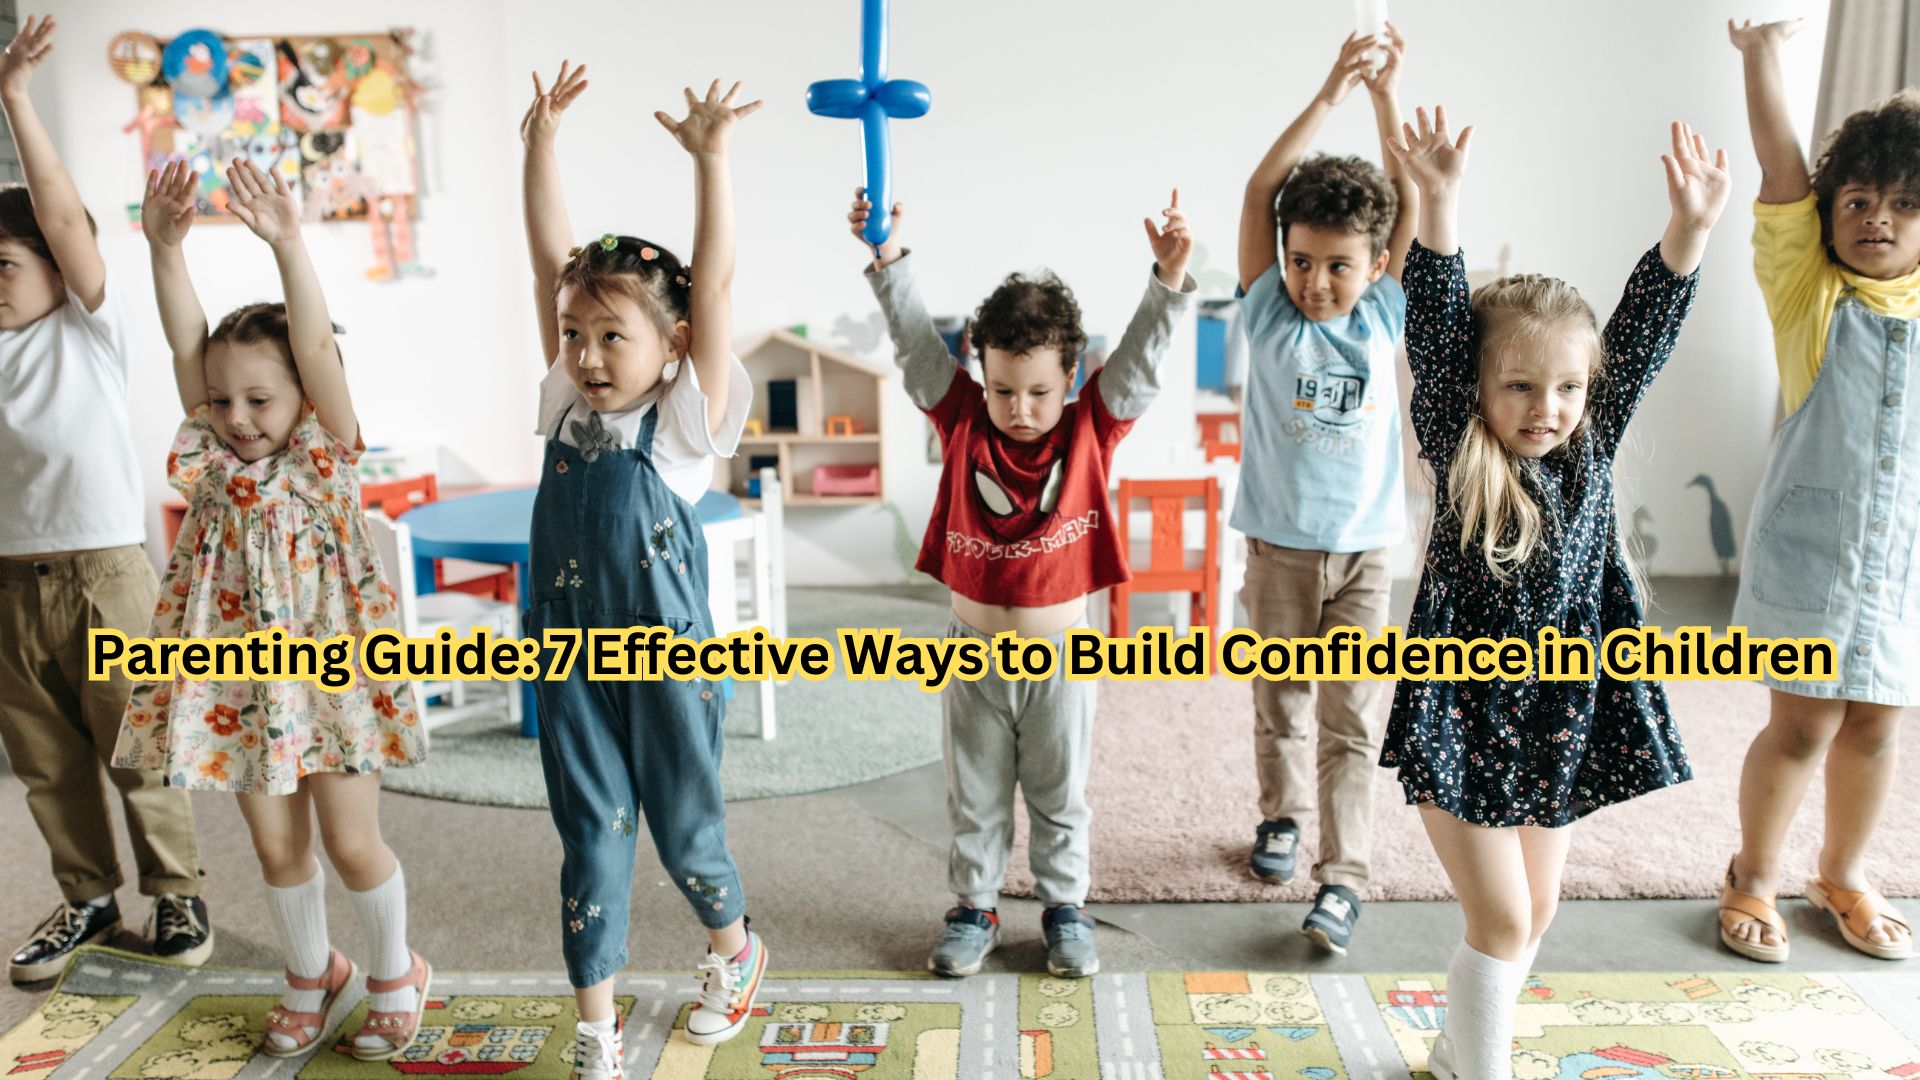 Parenting Guide: 7 Effective Ways to Build Confidence in Children